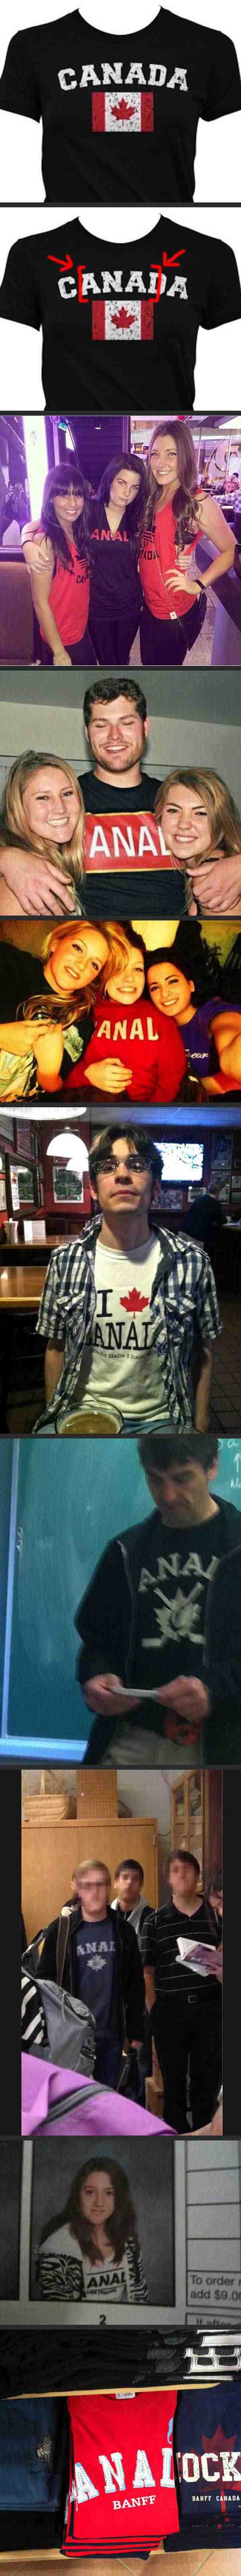 funny-pictures-canada-t-shirt-anal.jpg